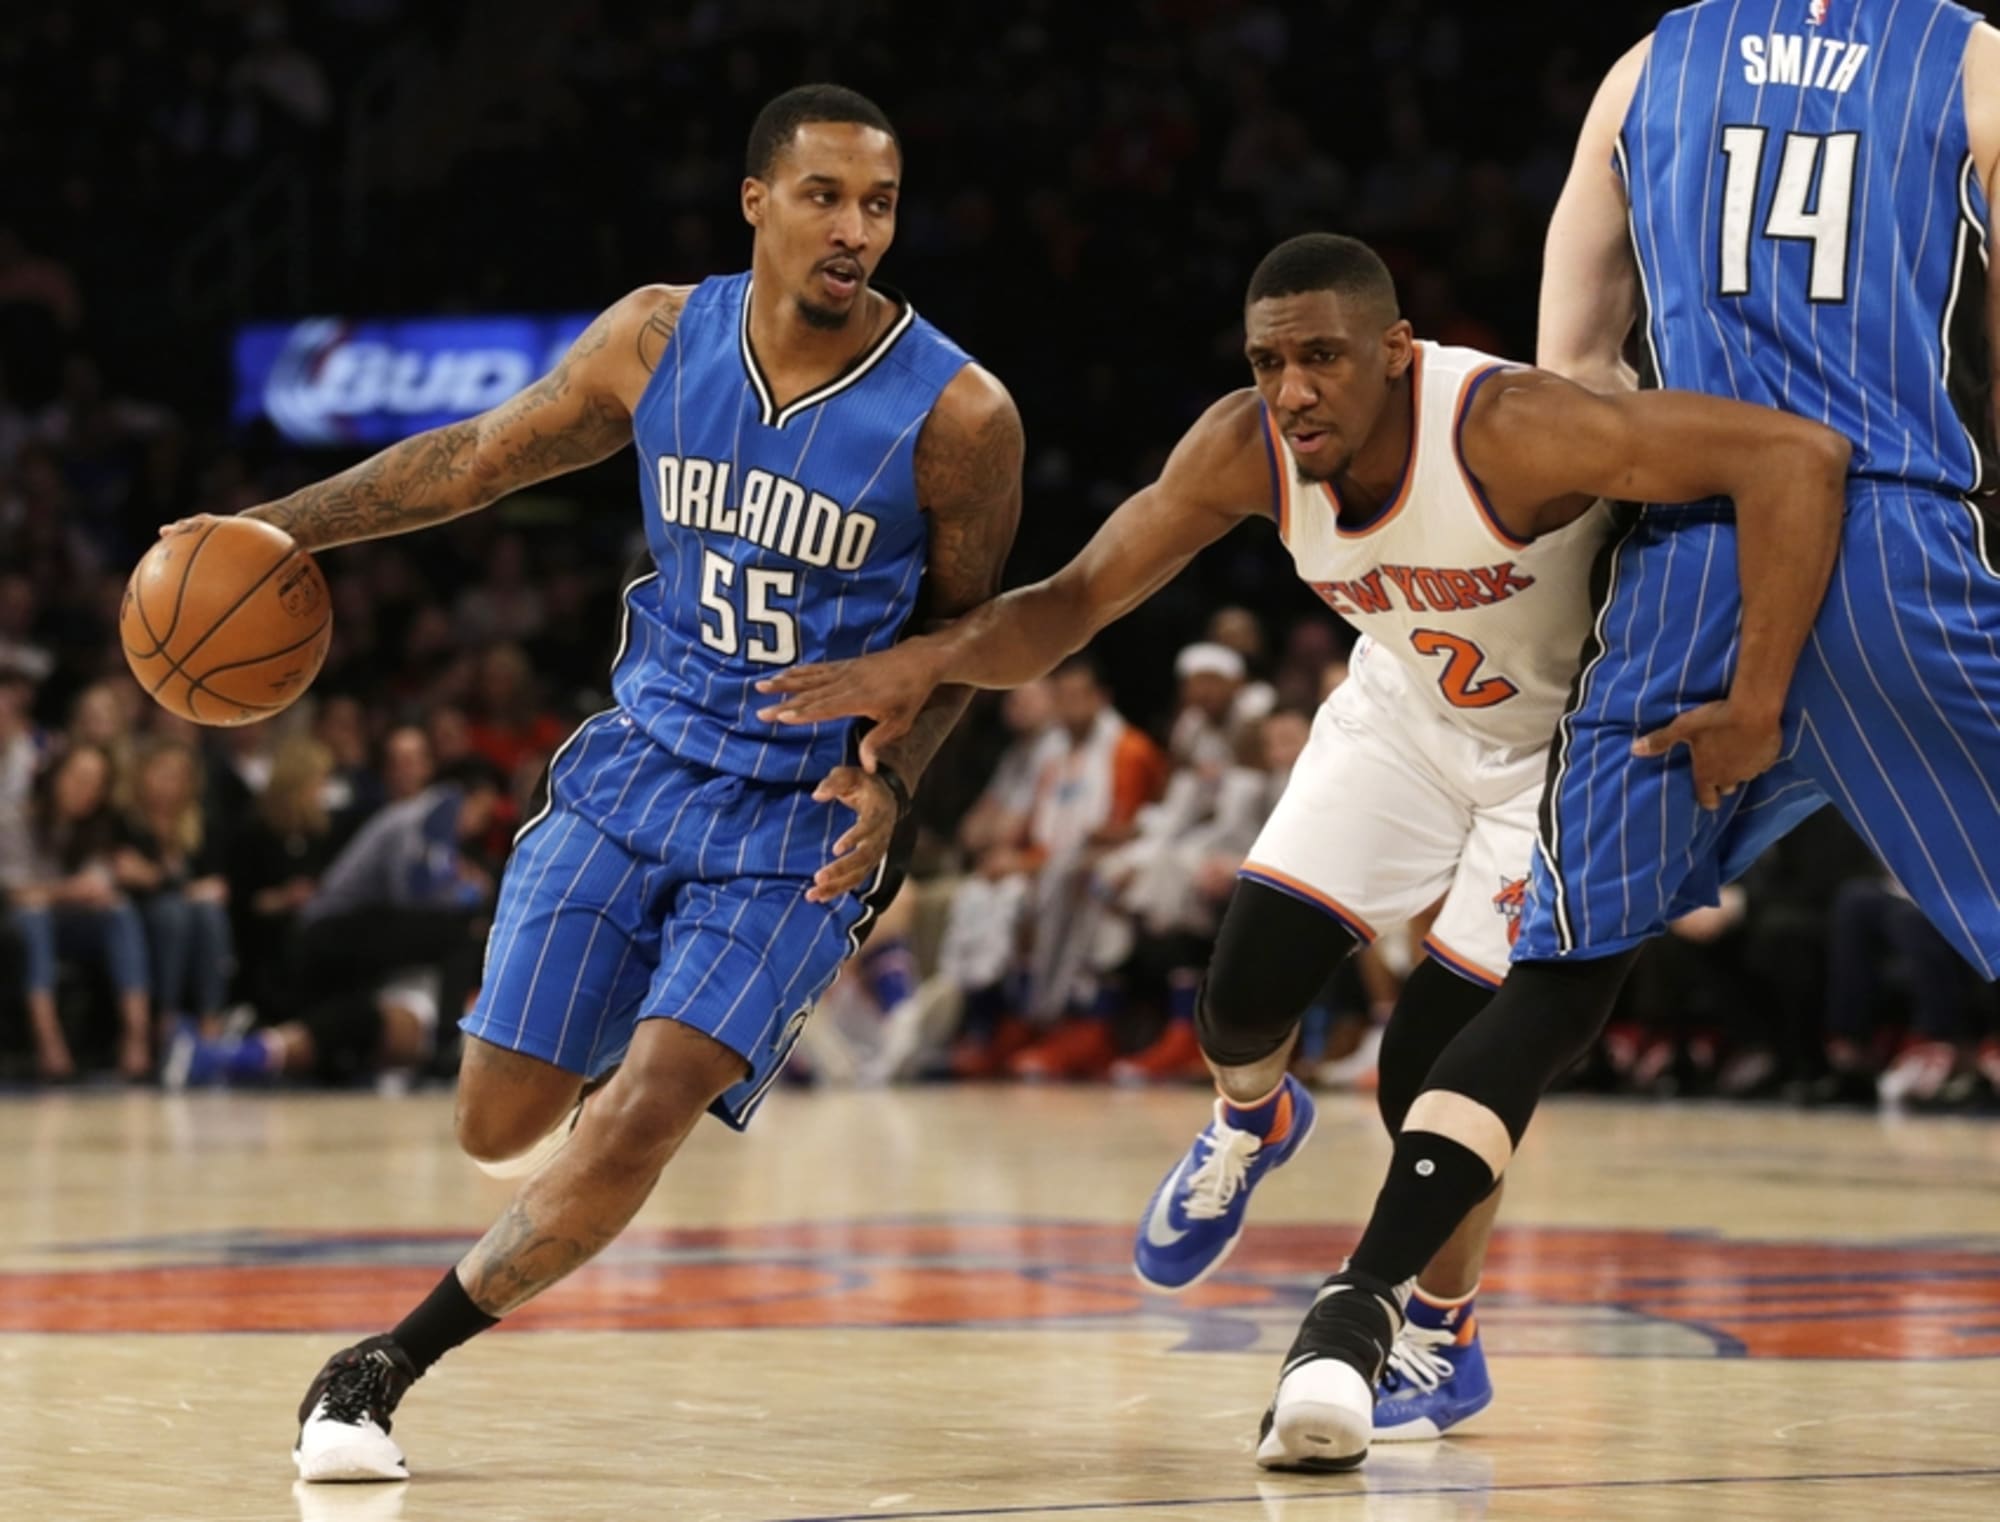 Brandon Jennings shared his thoughts on the state of today's NBA